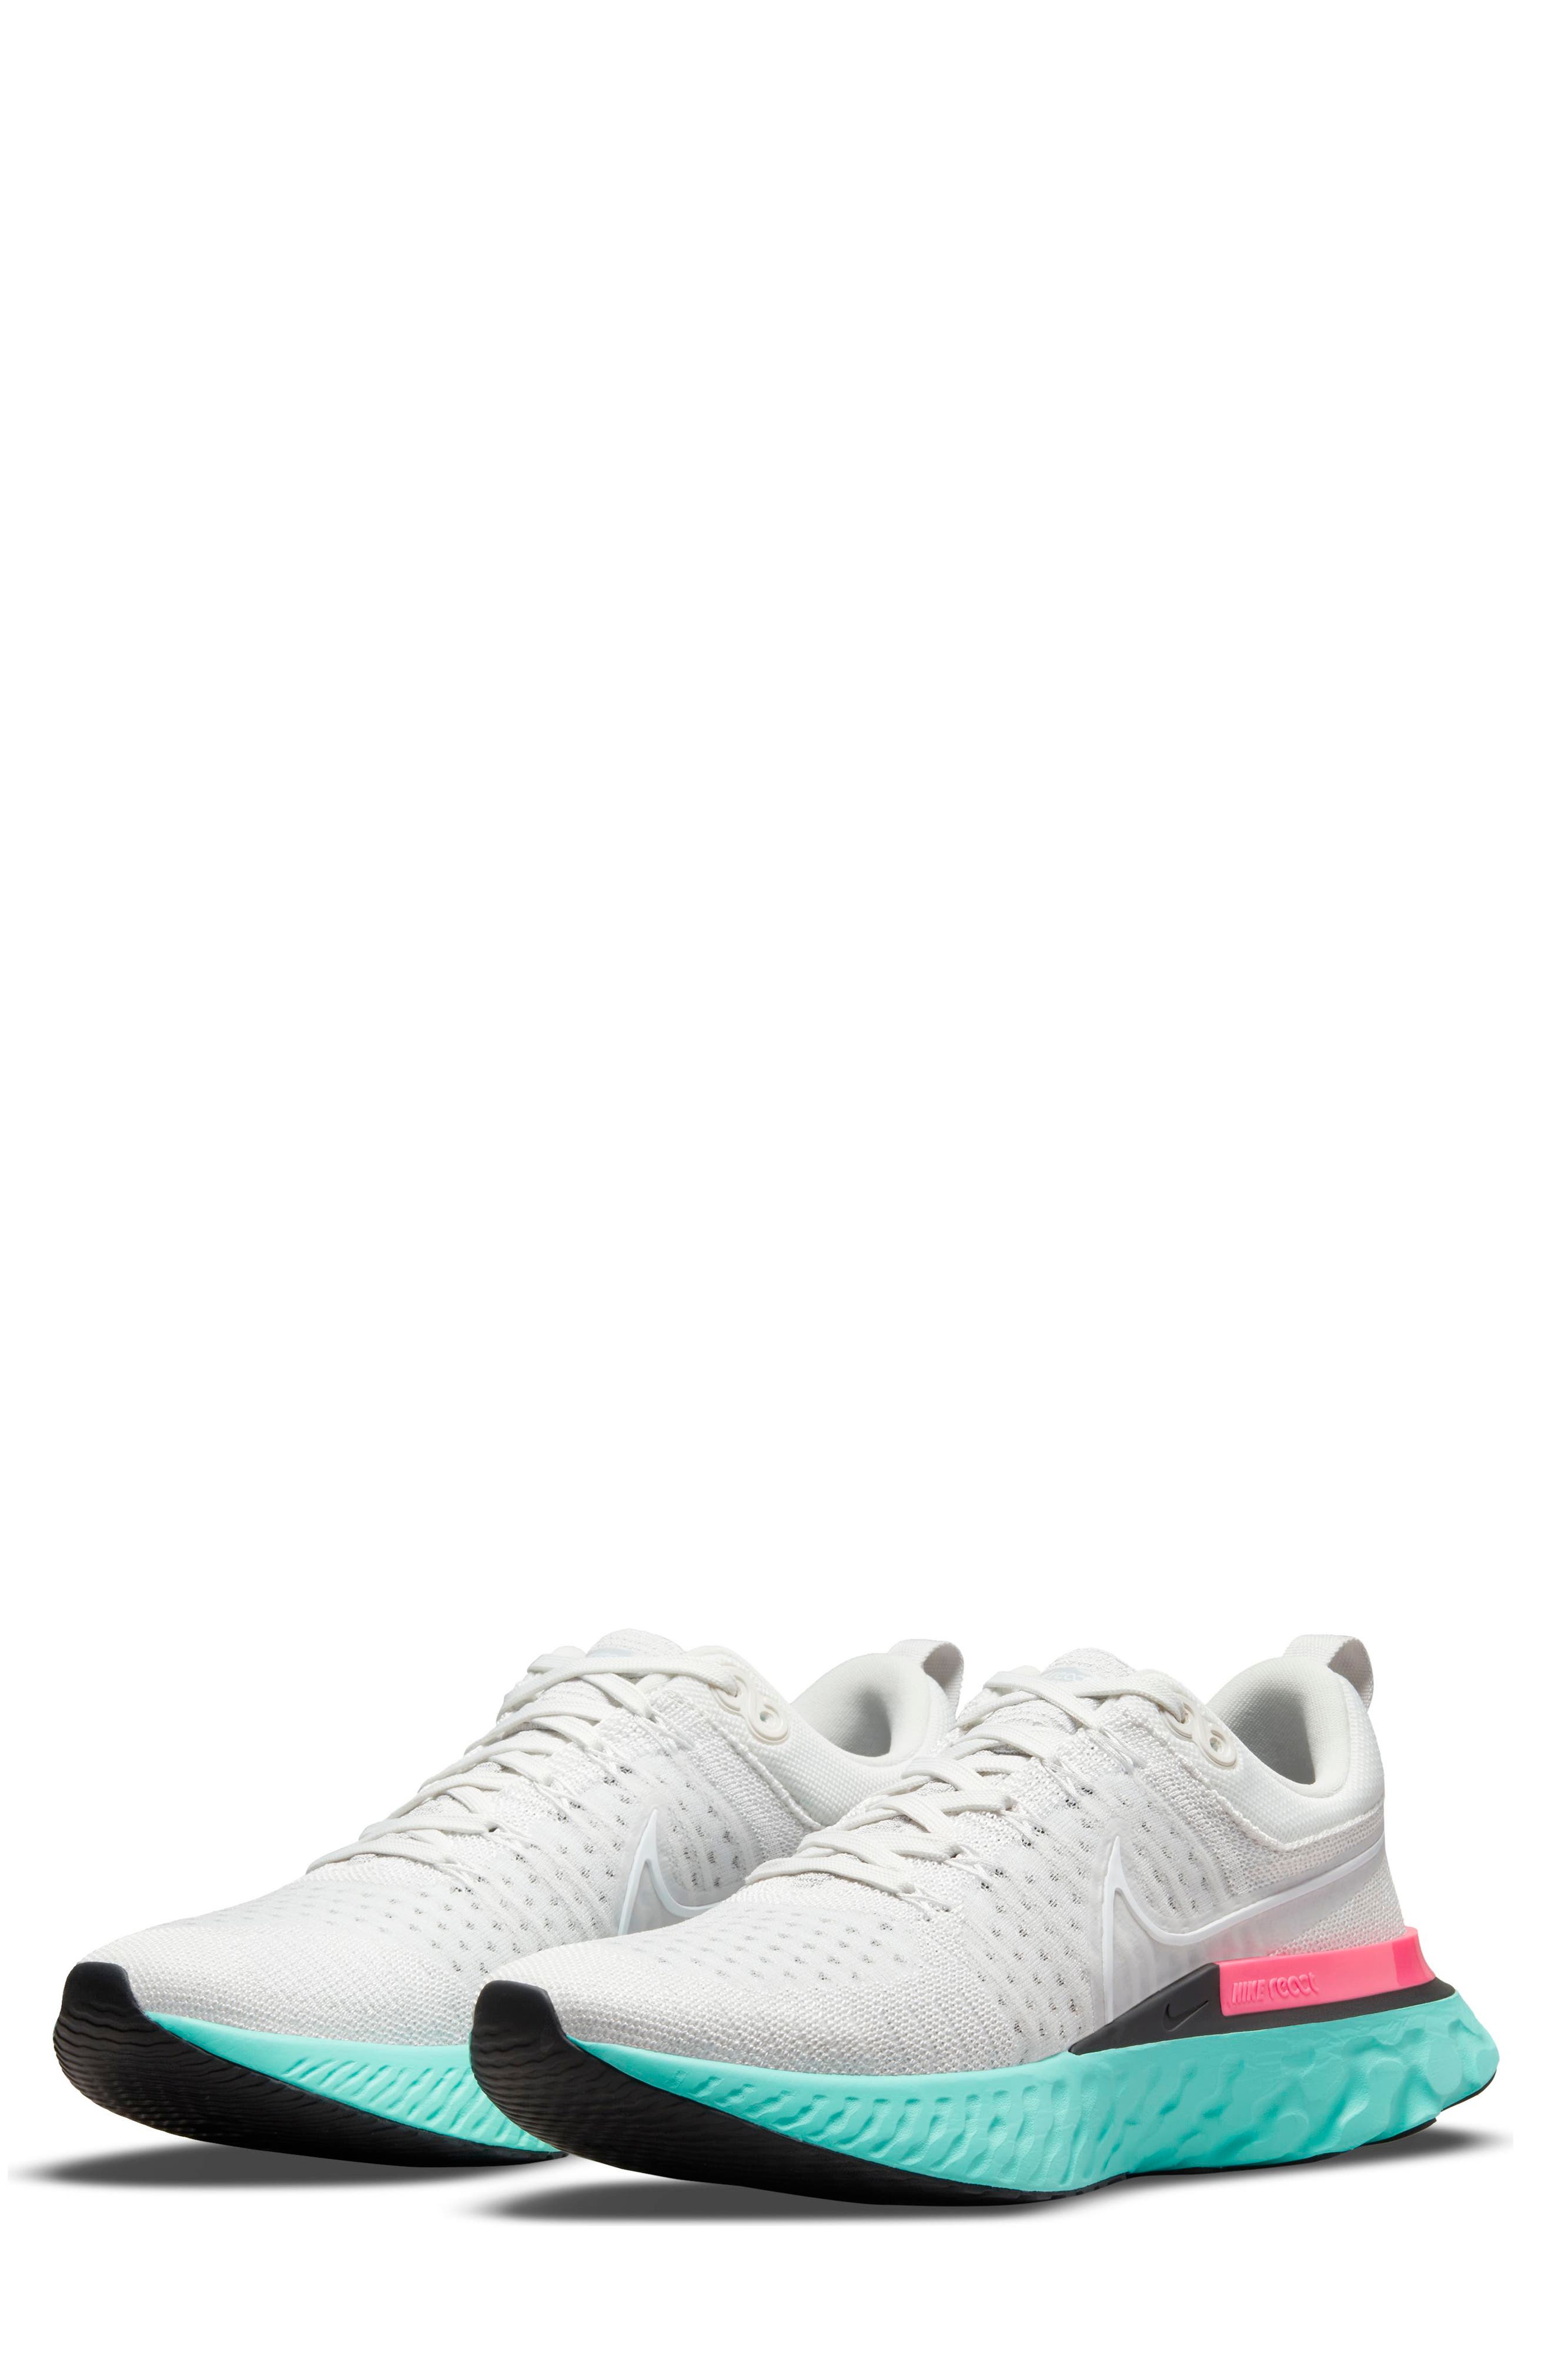 UPC 195237000326 product image for Nike React Infinity Run Flyknit 2 Running Shoe in Platinum Tint/White at Nordstr | upcitemdb.com